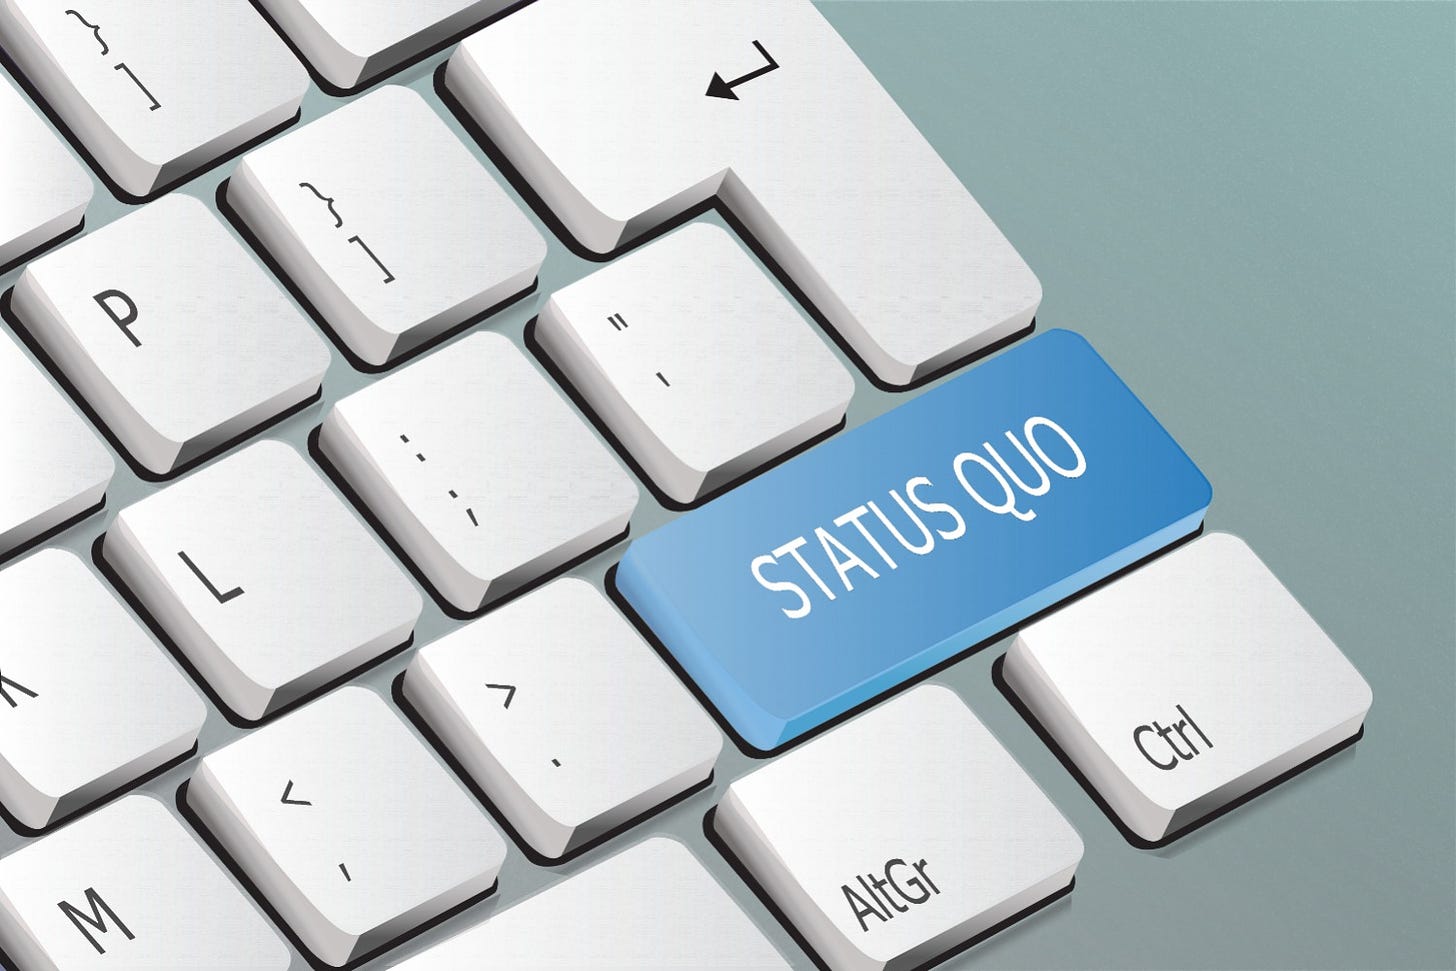 Keyboard with enter button labeled as 'status quo'